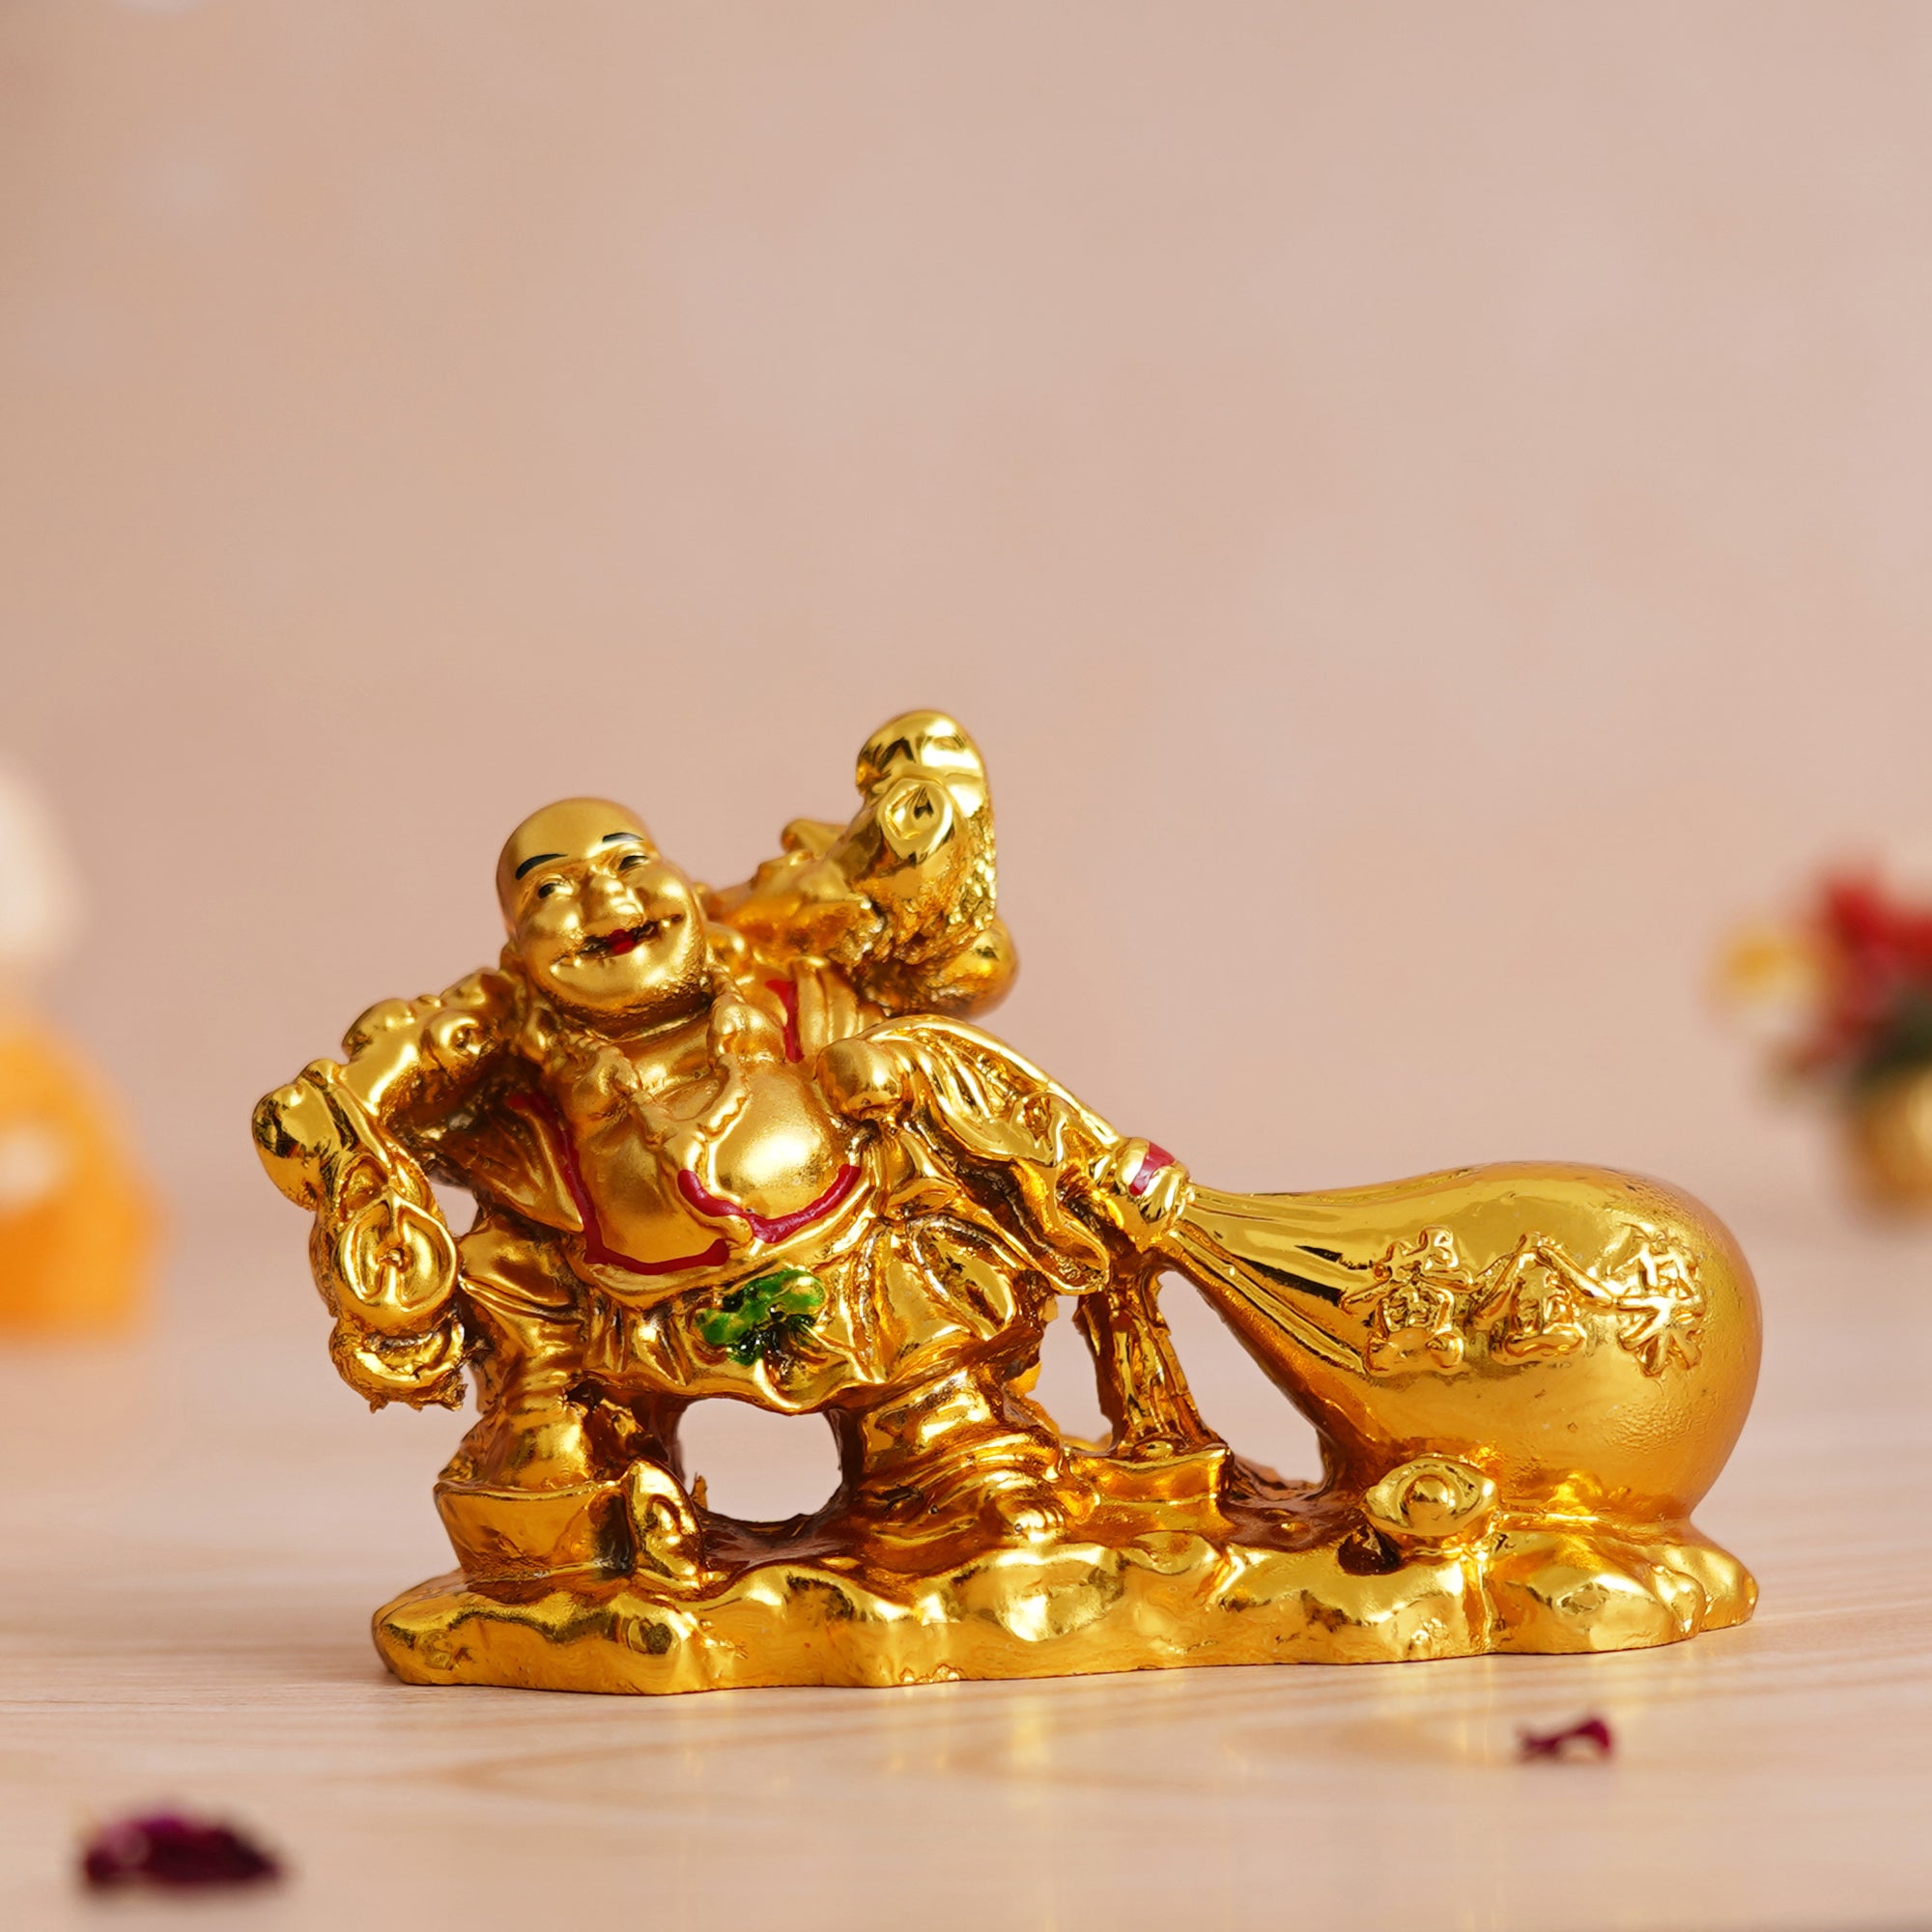 eCraftIndia Golden Polyresin Feng Shui Laughing Buddha Idol with Money Bag For Wealth And Good Luck